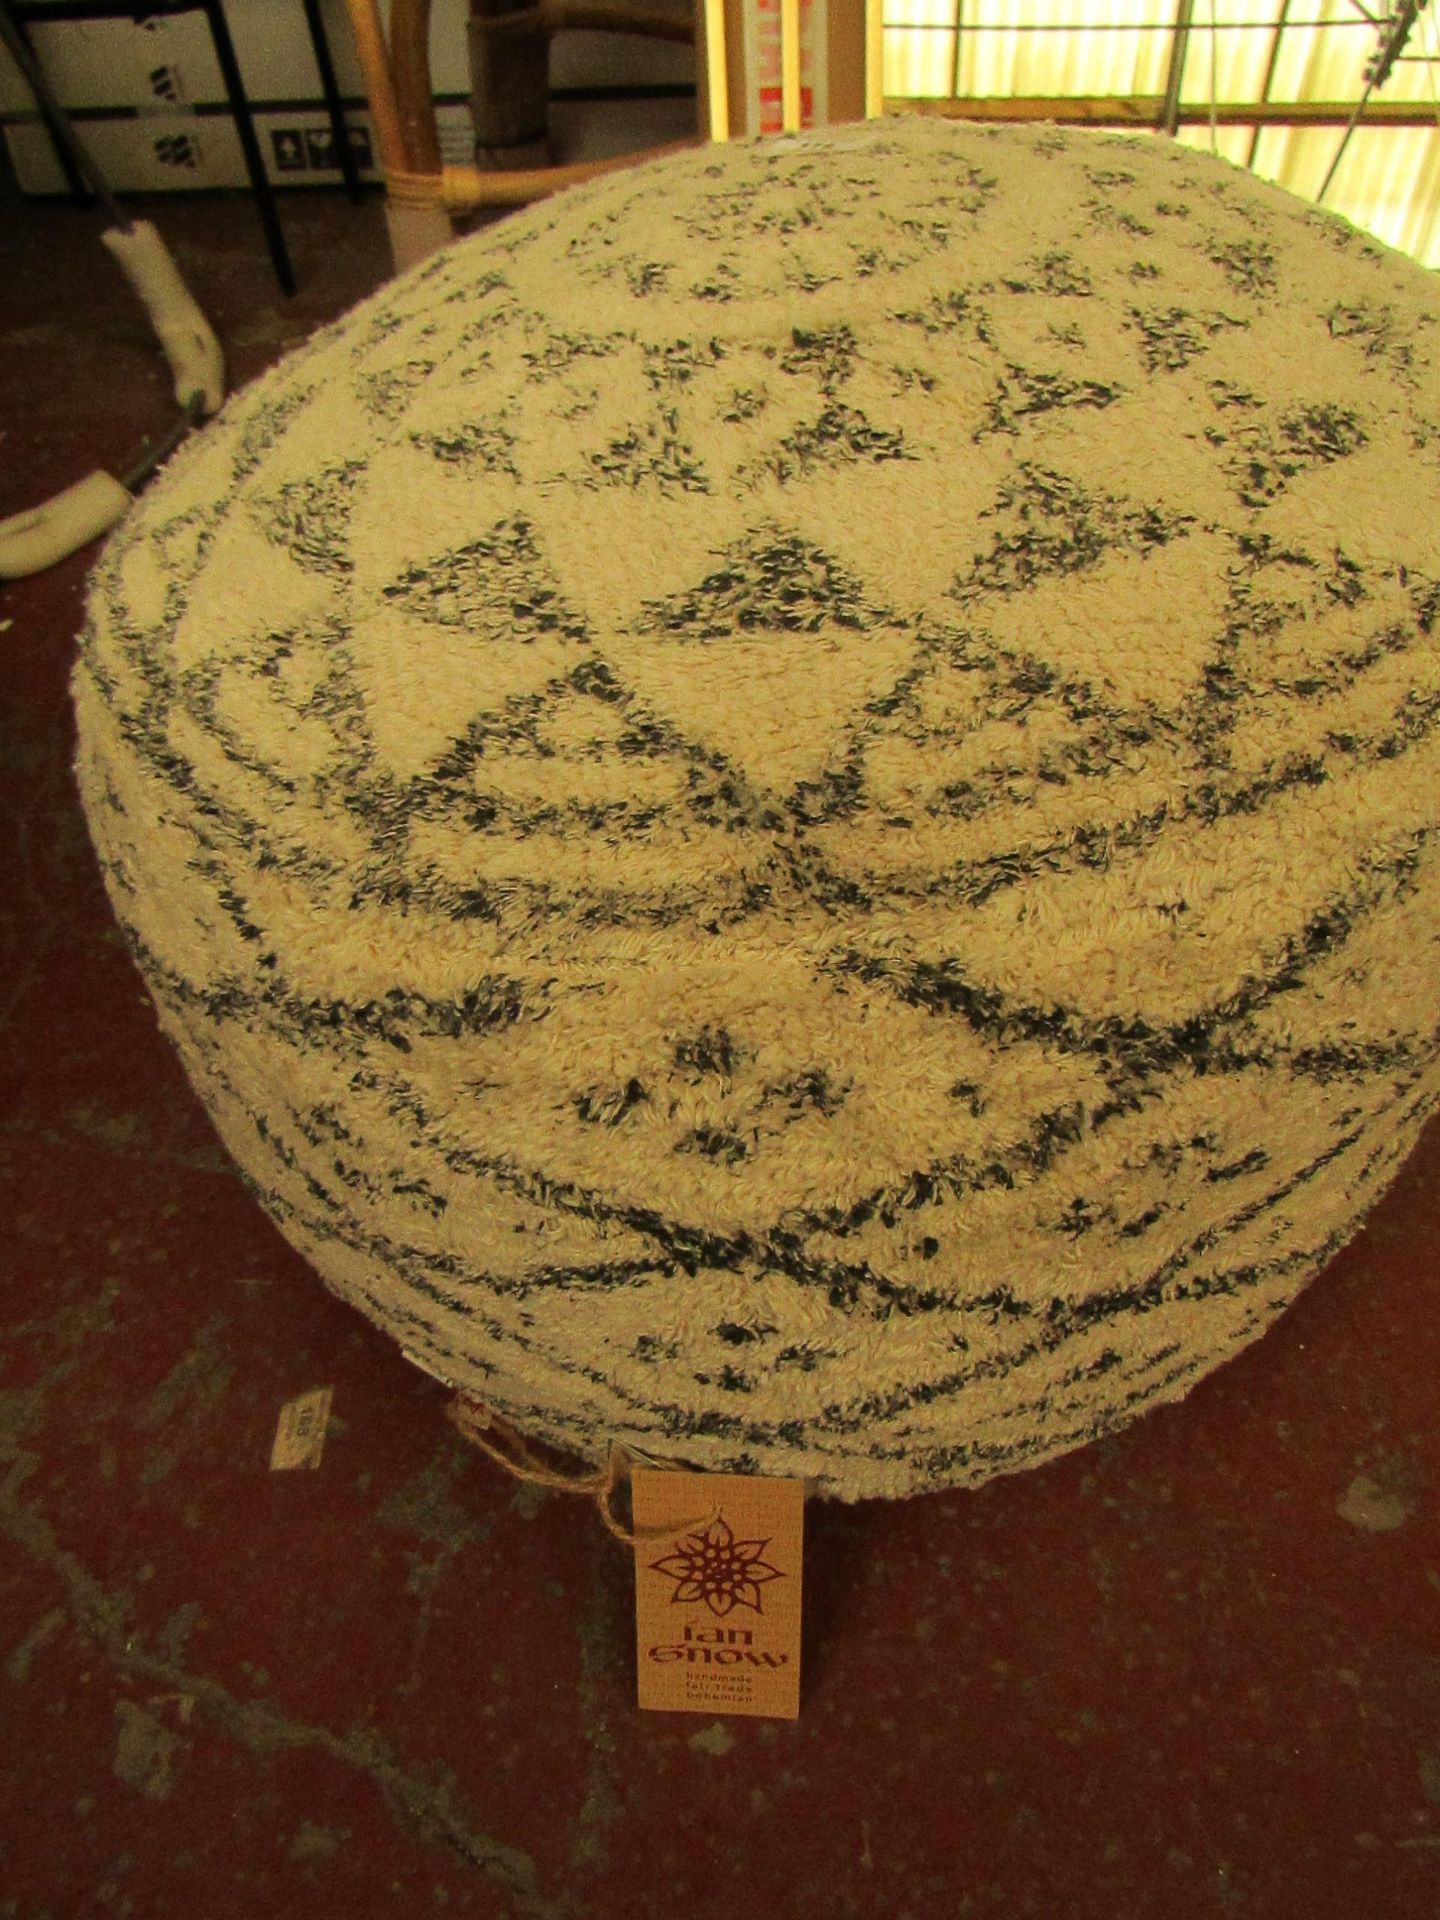 | 1x | COX AND COX IAN SNOW POUFFE | LOOKS IN GOOD CONDITION BUT MAY HAVE MARKS | RRP £85 |